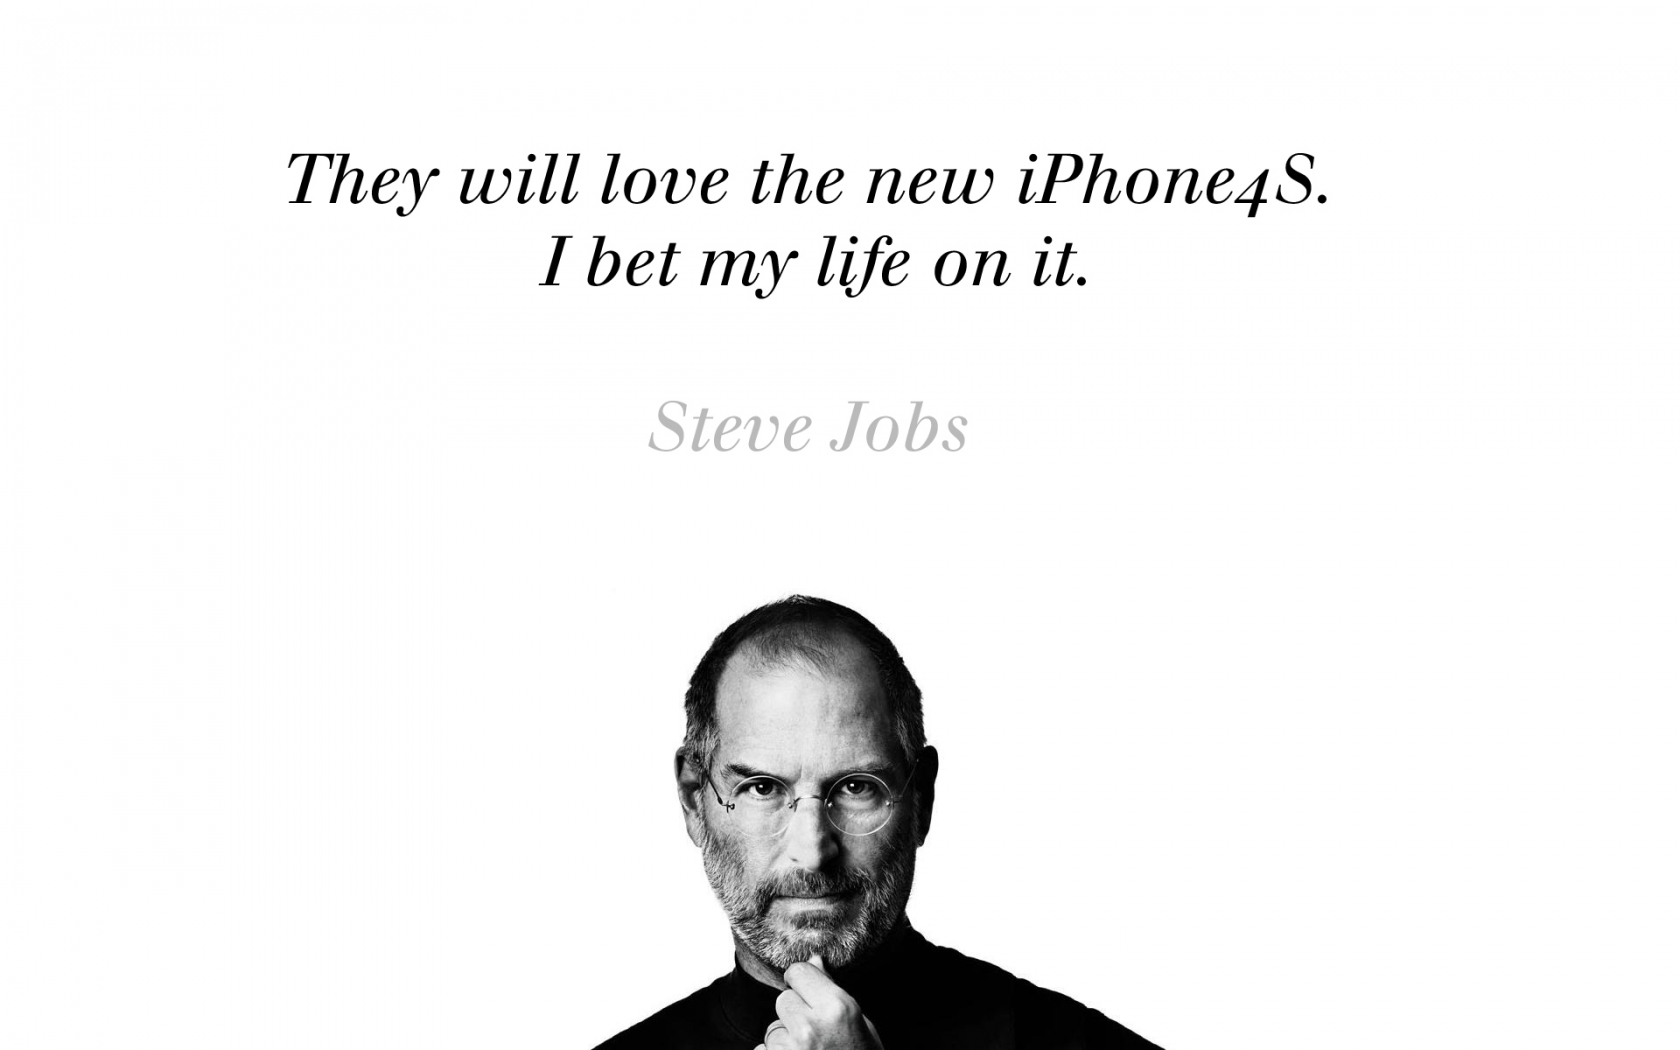 Steve Jobs about iPhone 4S for 1680 x 1050 widescreen resolution